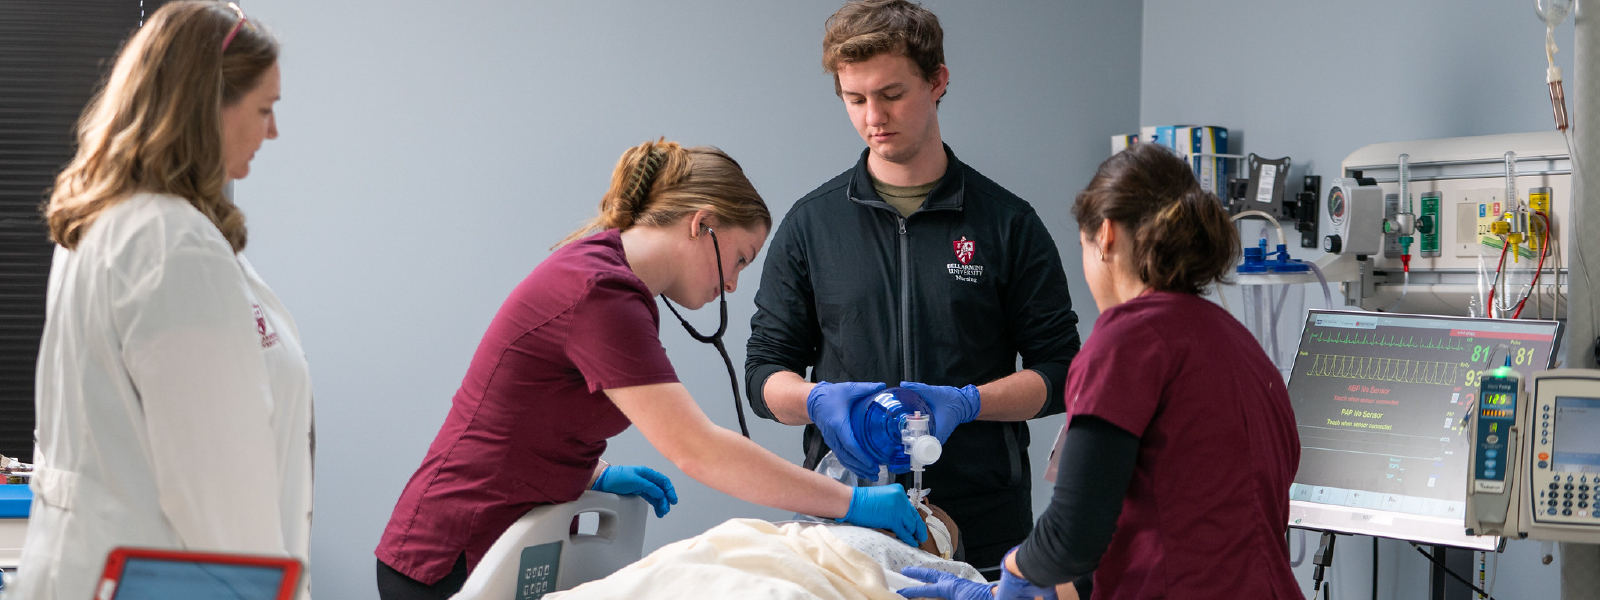 students learning nursing skills in a simulation lab